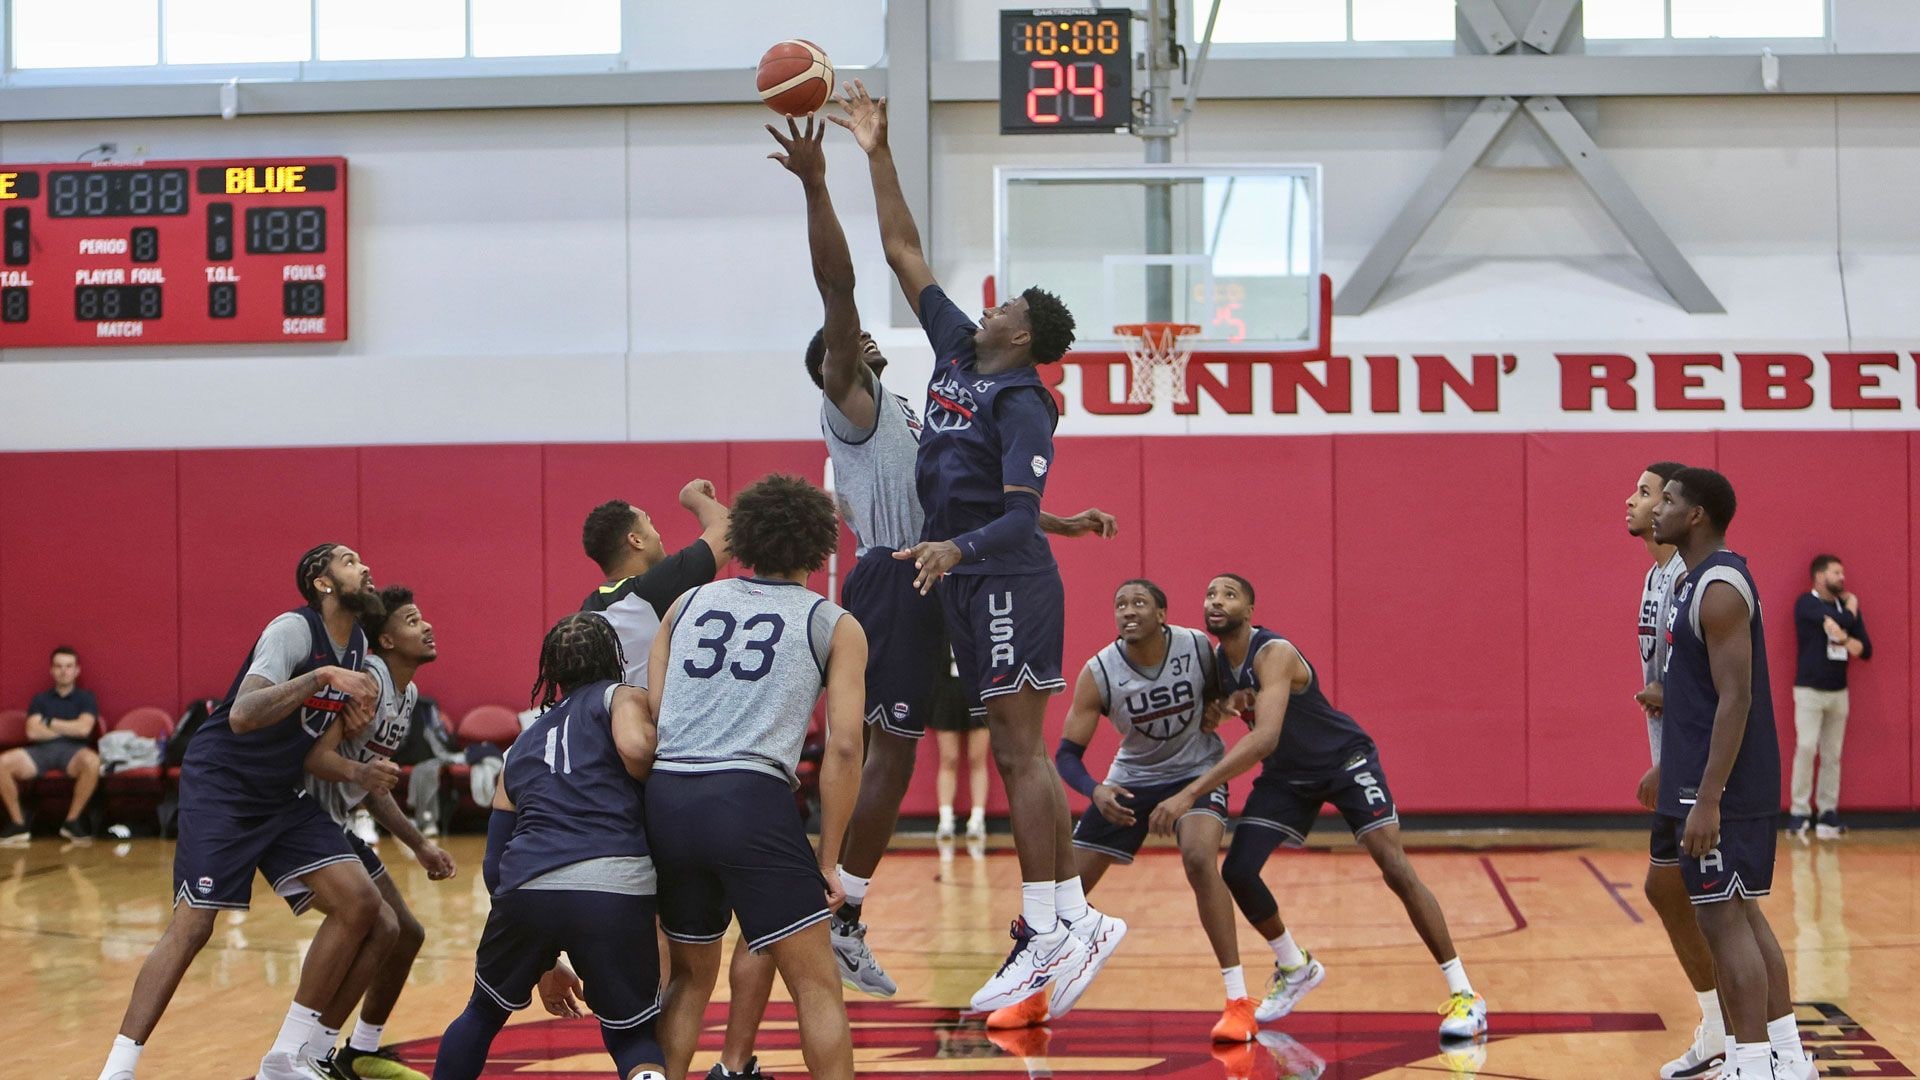 LAS VEGAS, NV - AUGUST 5: Jaren Jackson Jr. jumps for the ball during the USA Men's National Team Practice as part of 2023 FIBA World Cup on August 5, 2023 at the Mendenhall Center in Las Vegas, Nevada.